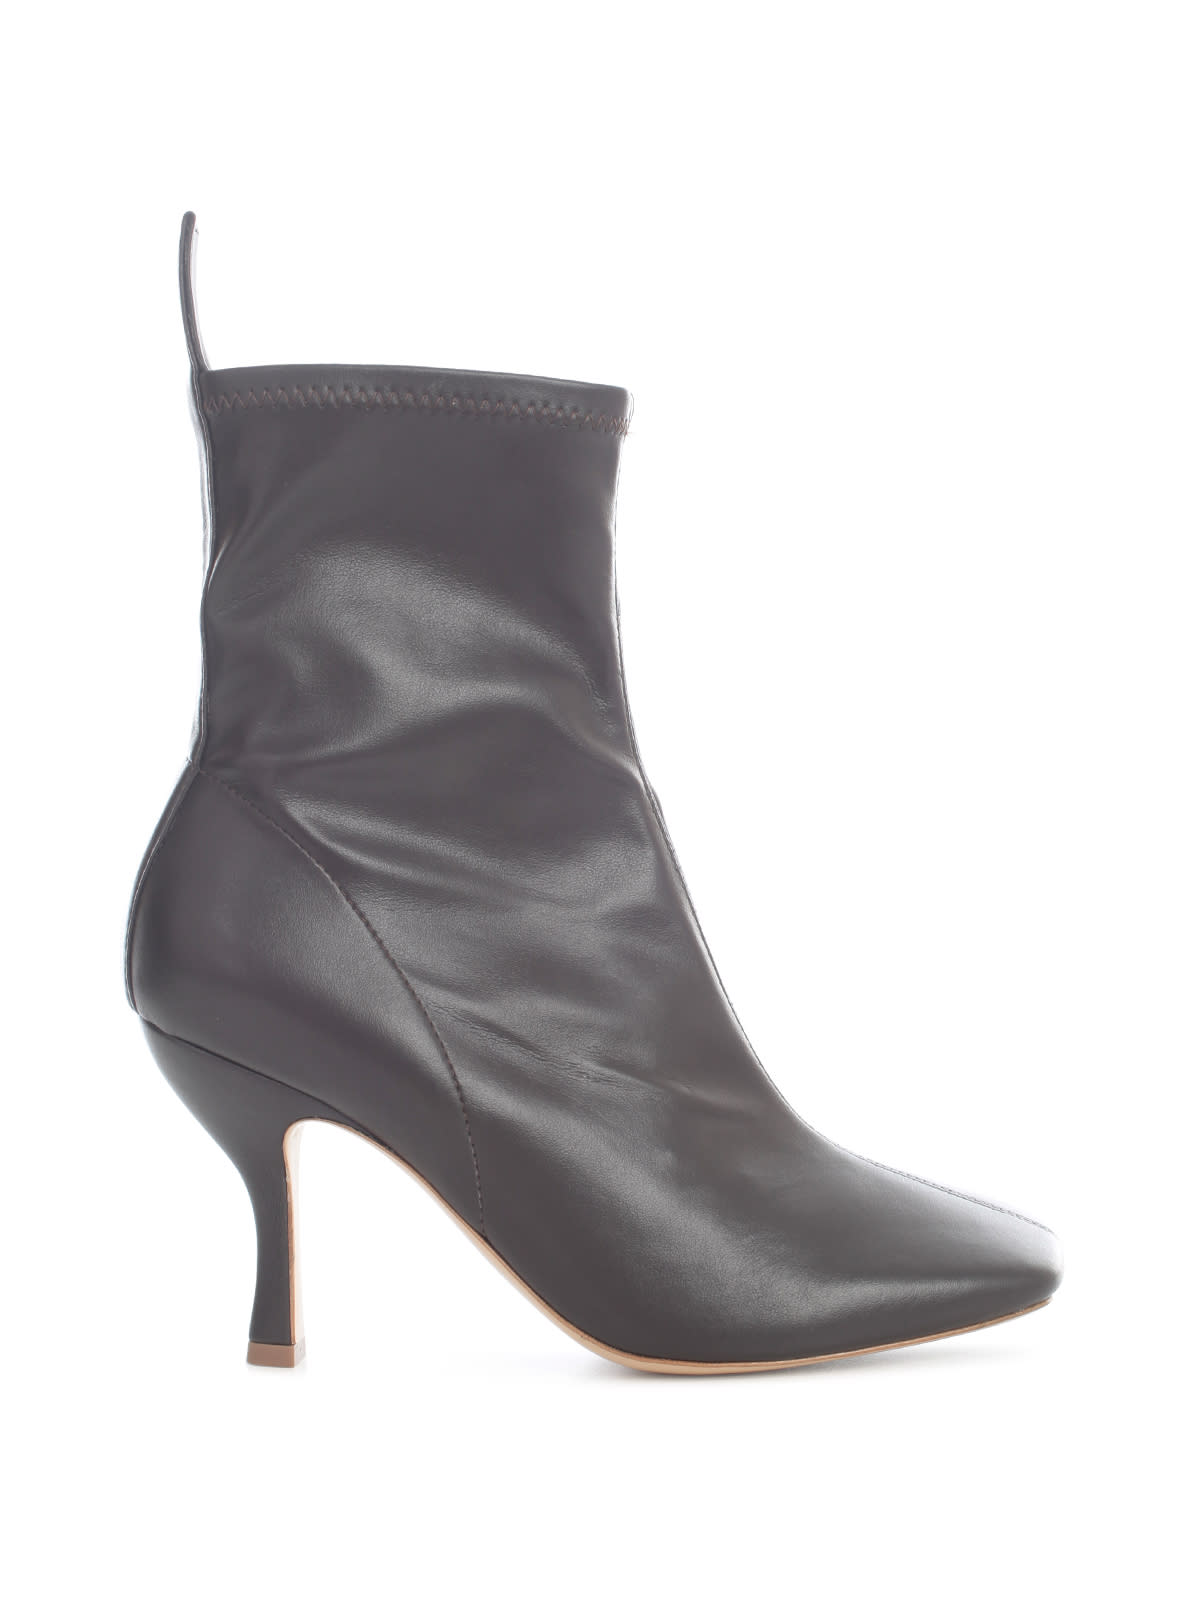 GIA COUTURE Soraya 80mm Stretch Boots